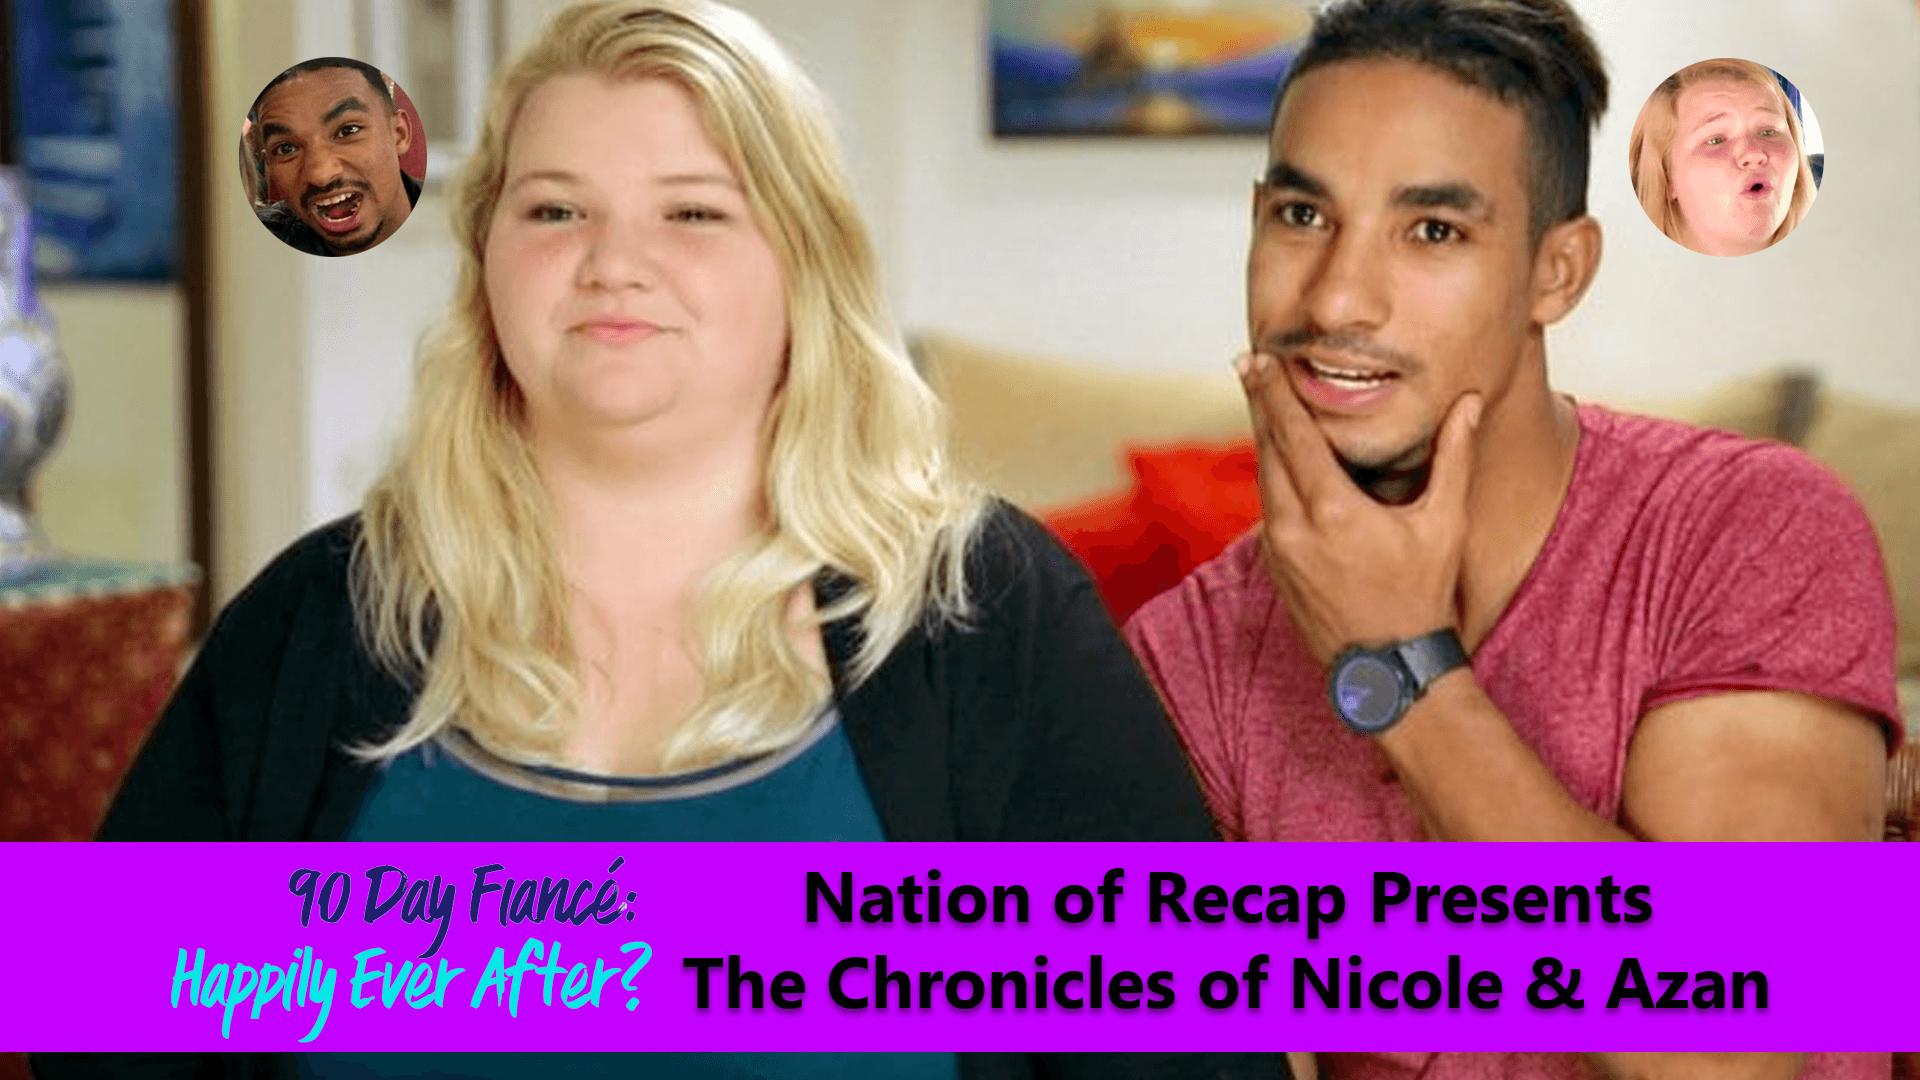 90 Day Fiance Happily Ever After? Nicole and Azan